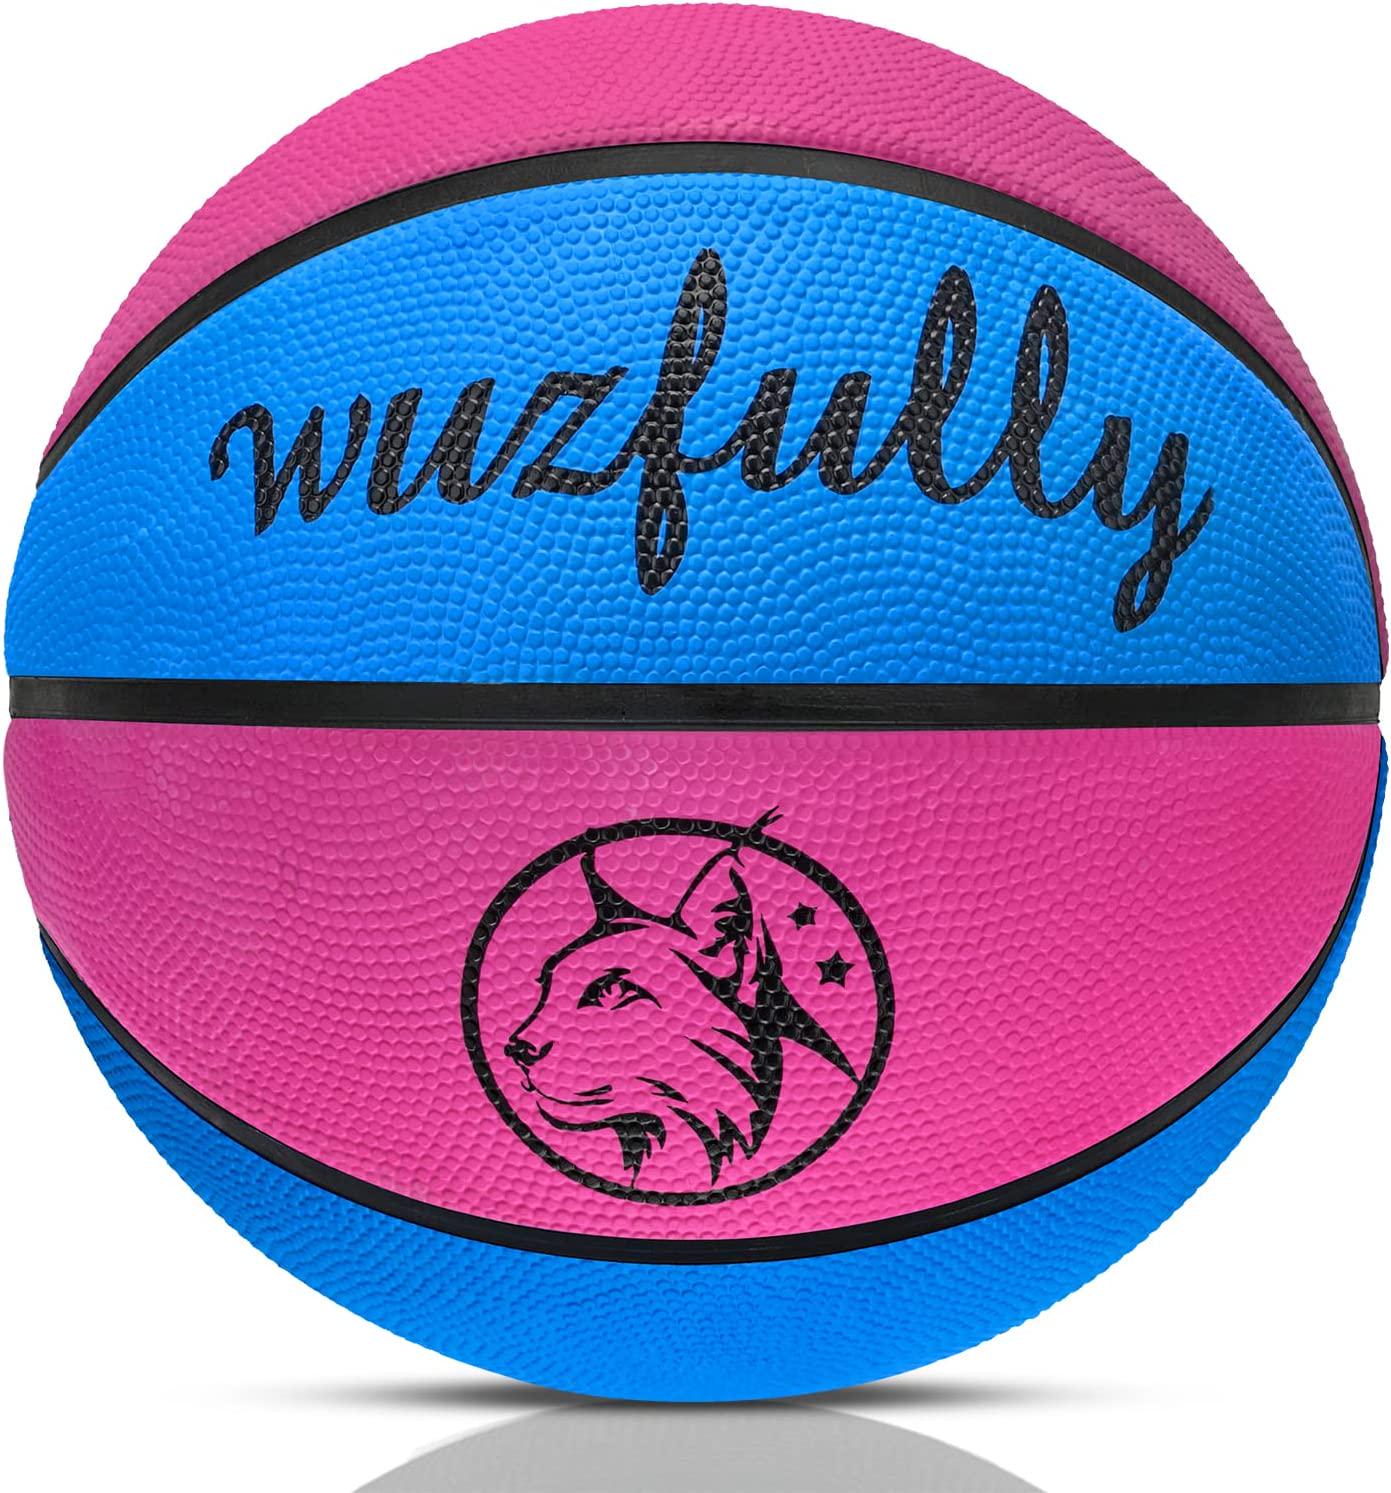 Wuzfully, Kids Rubber Basketball Size 5 (27.5 Inch) for Indoor Outdoor Pool Play Games